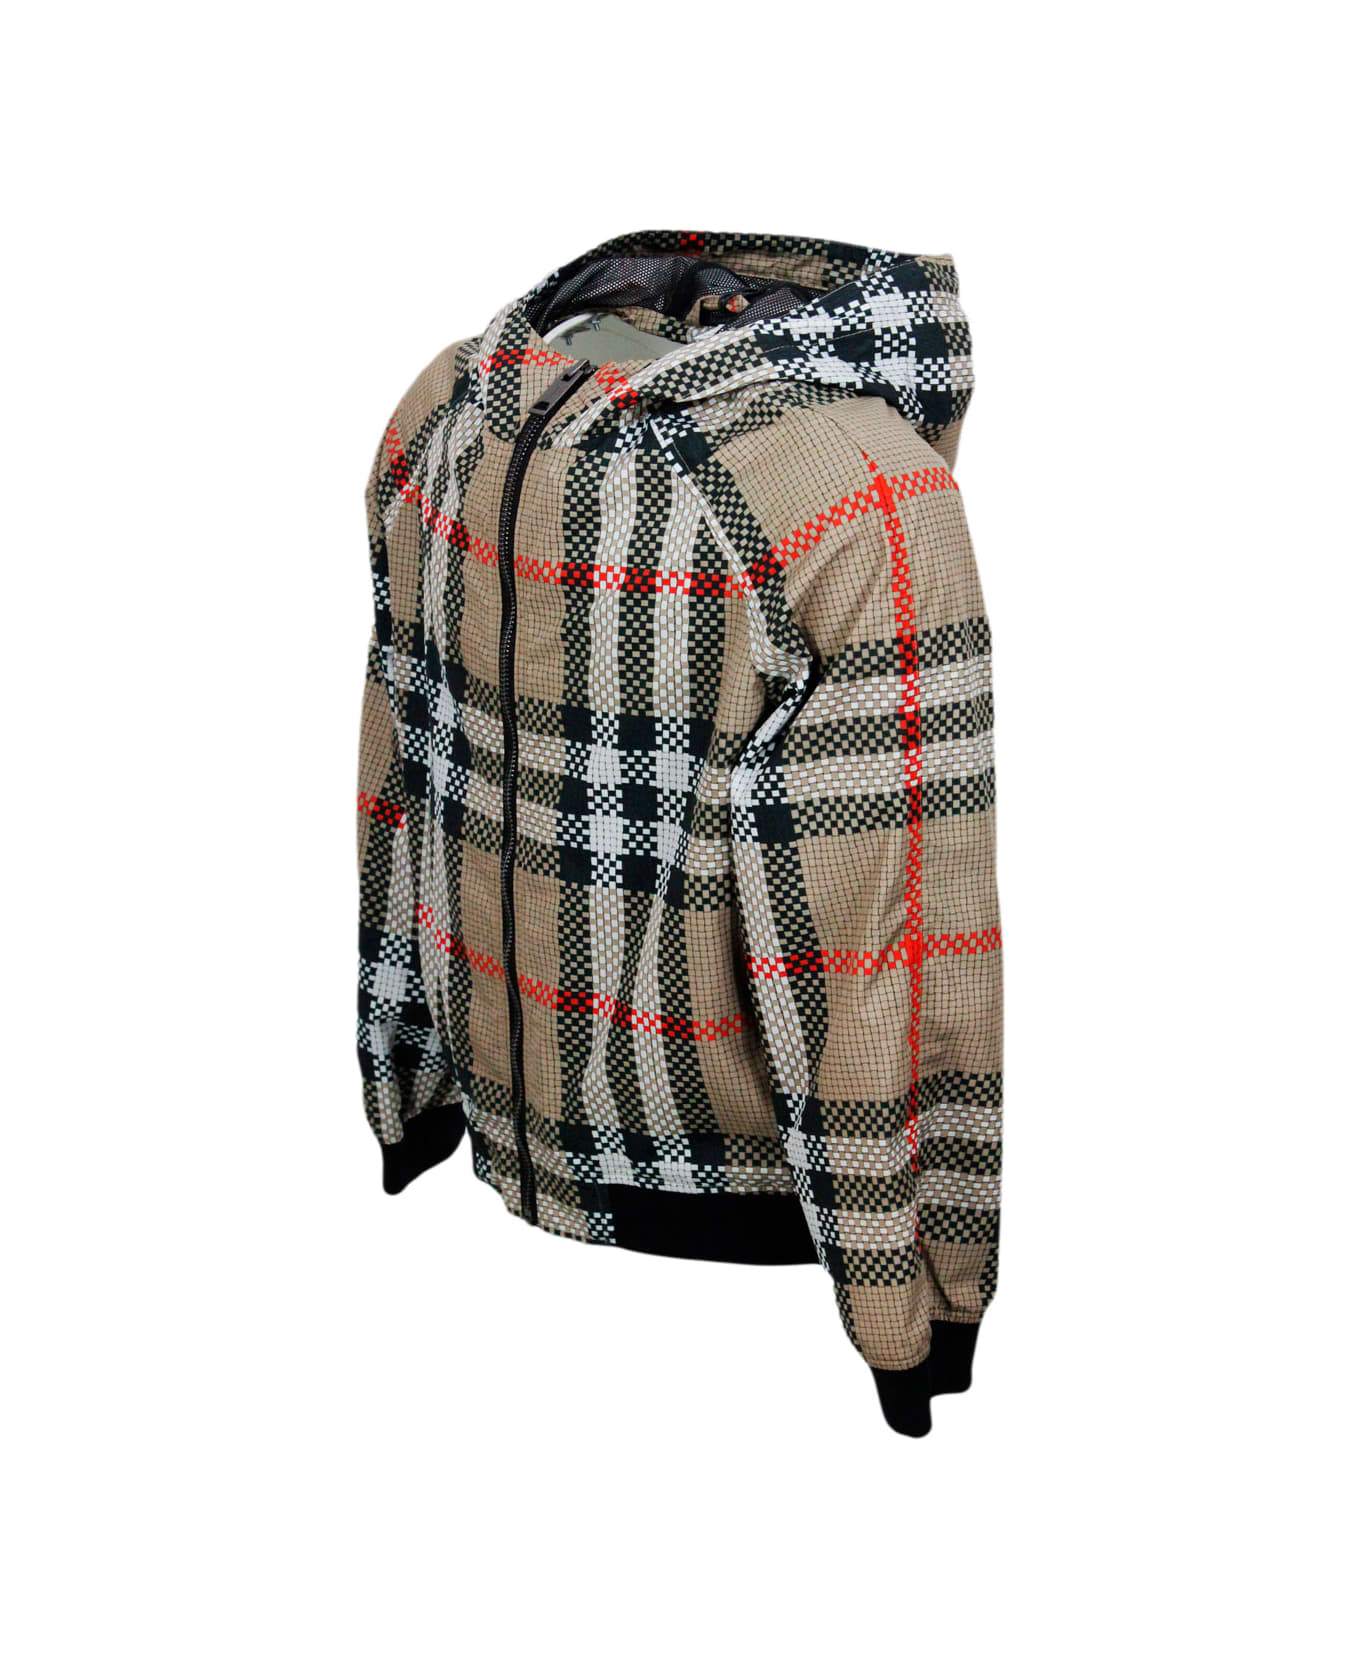 Burberry Lightweight Windproof bags In Technical Fabric With Hood And Zip Closure In Burberry New Check - Check Beige